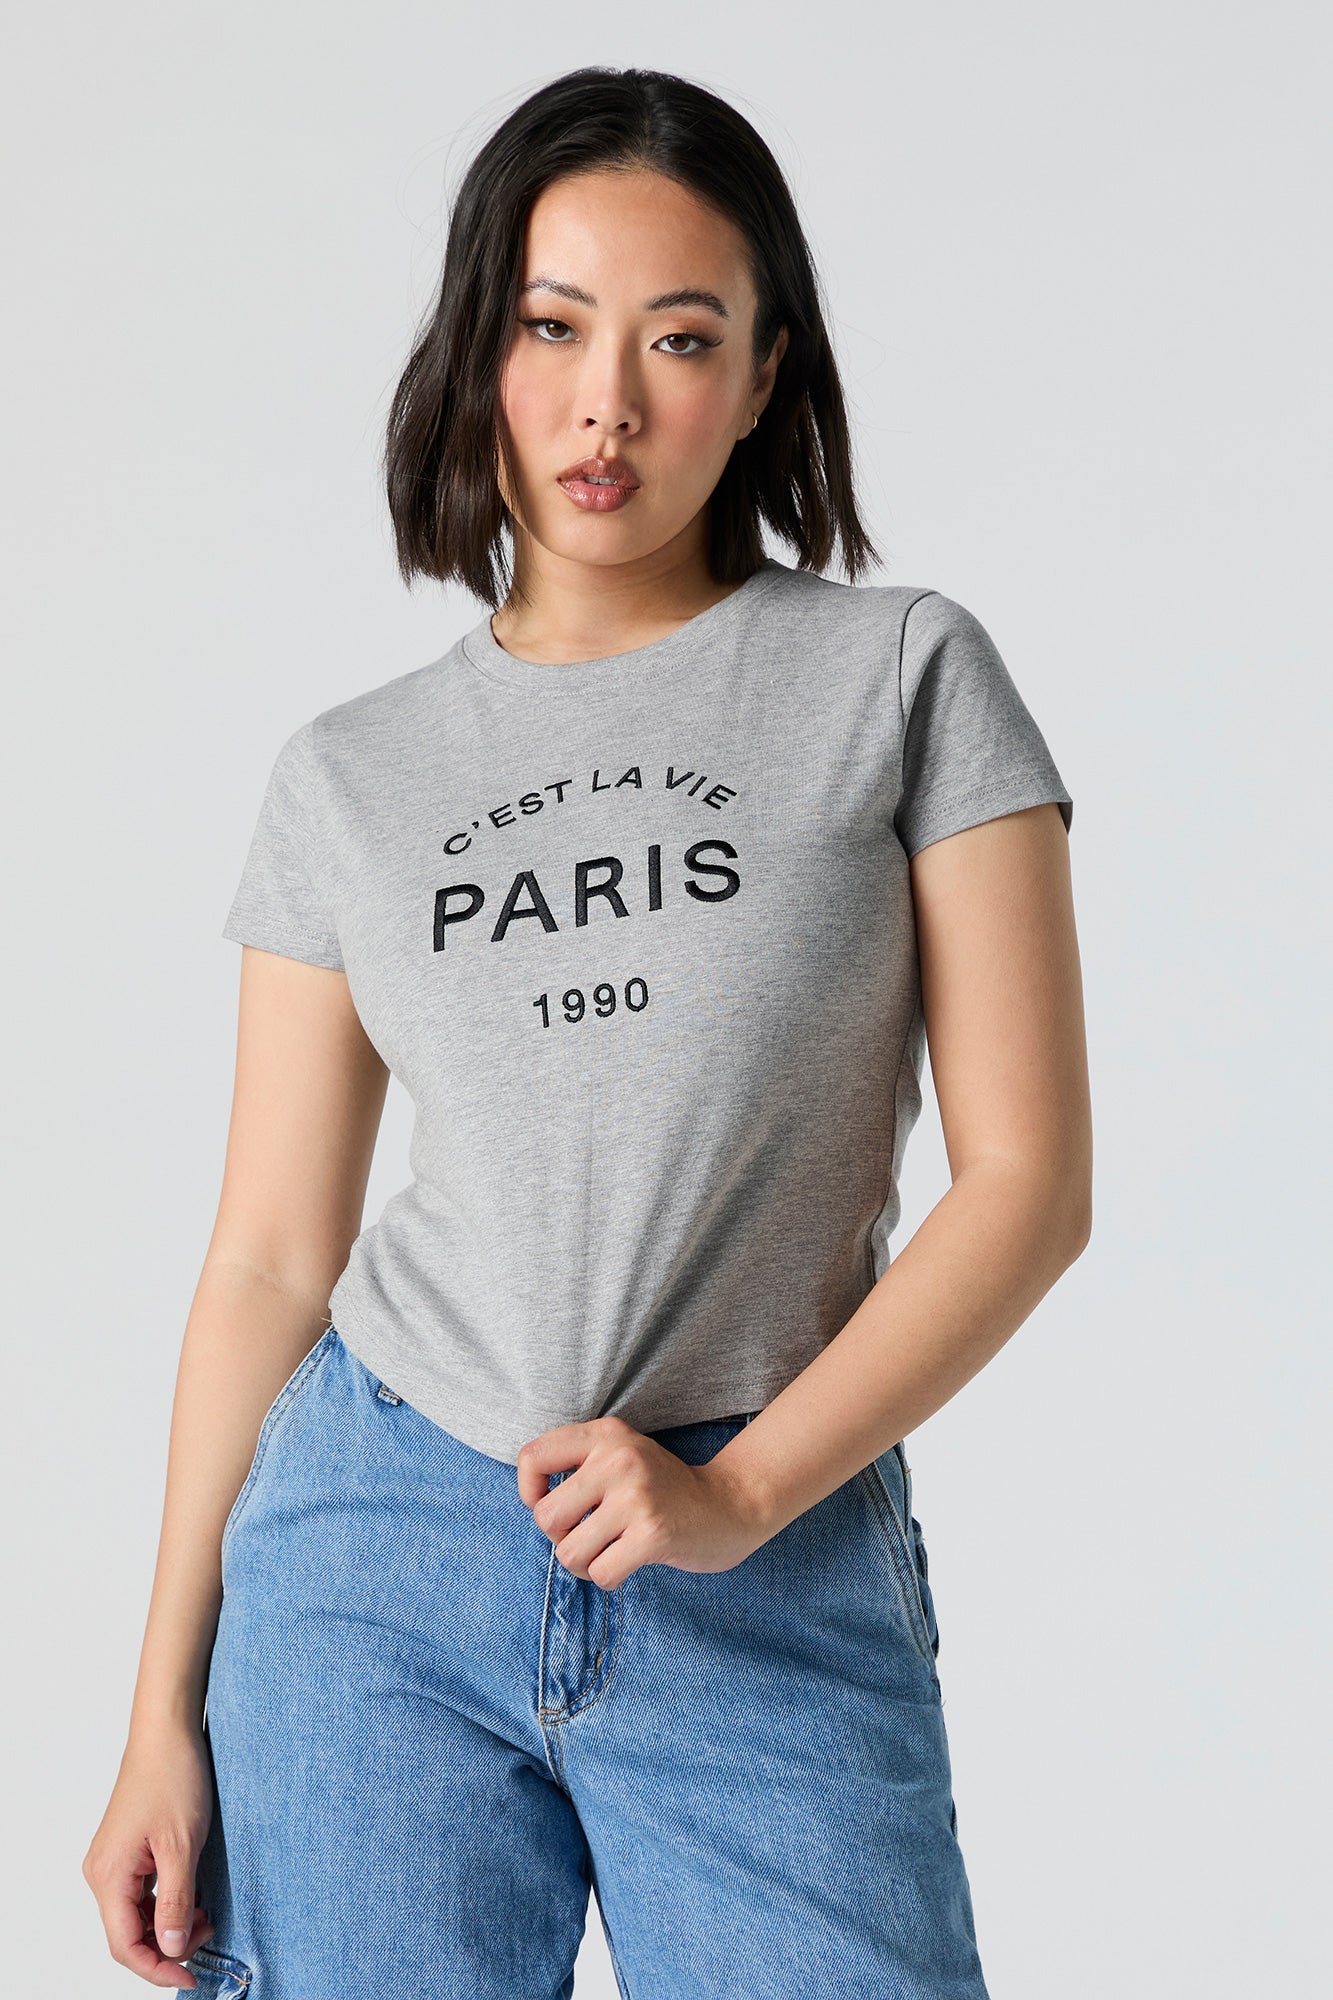 Paris 1990 Embroidered Baby T-Shirt